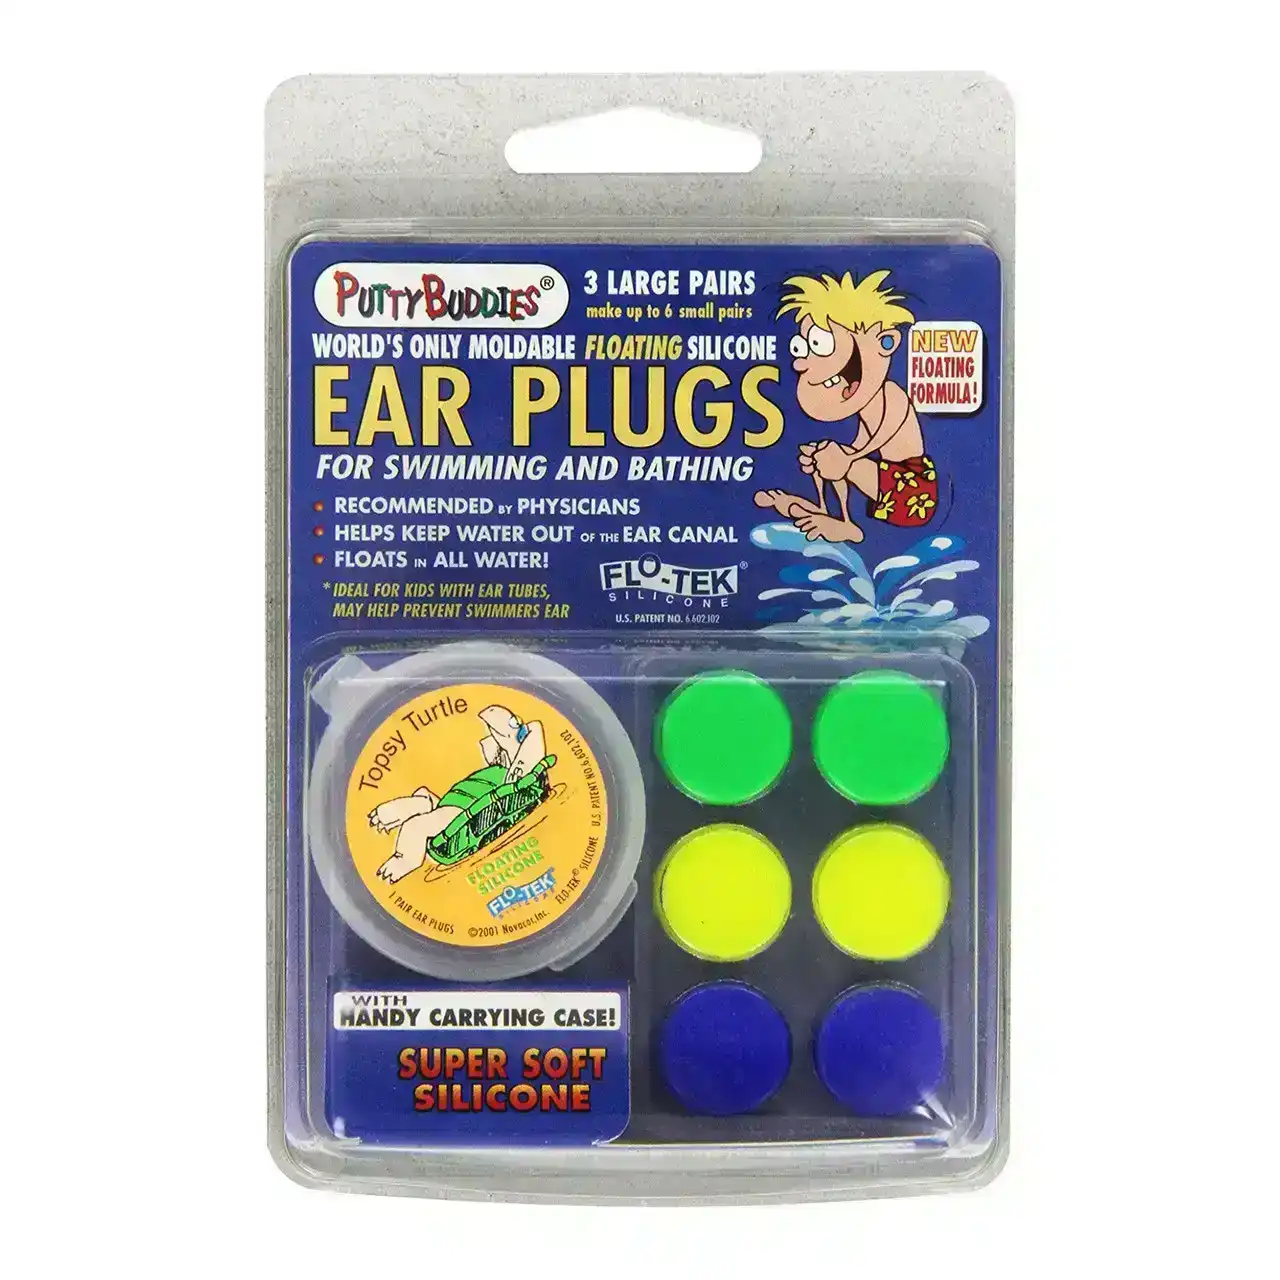 Putty Buddies Super Soft Silicone Floating Ear Plugs 3 Pack